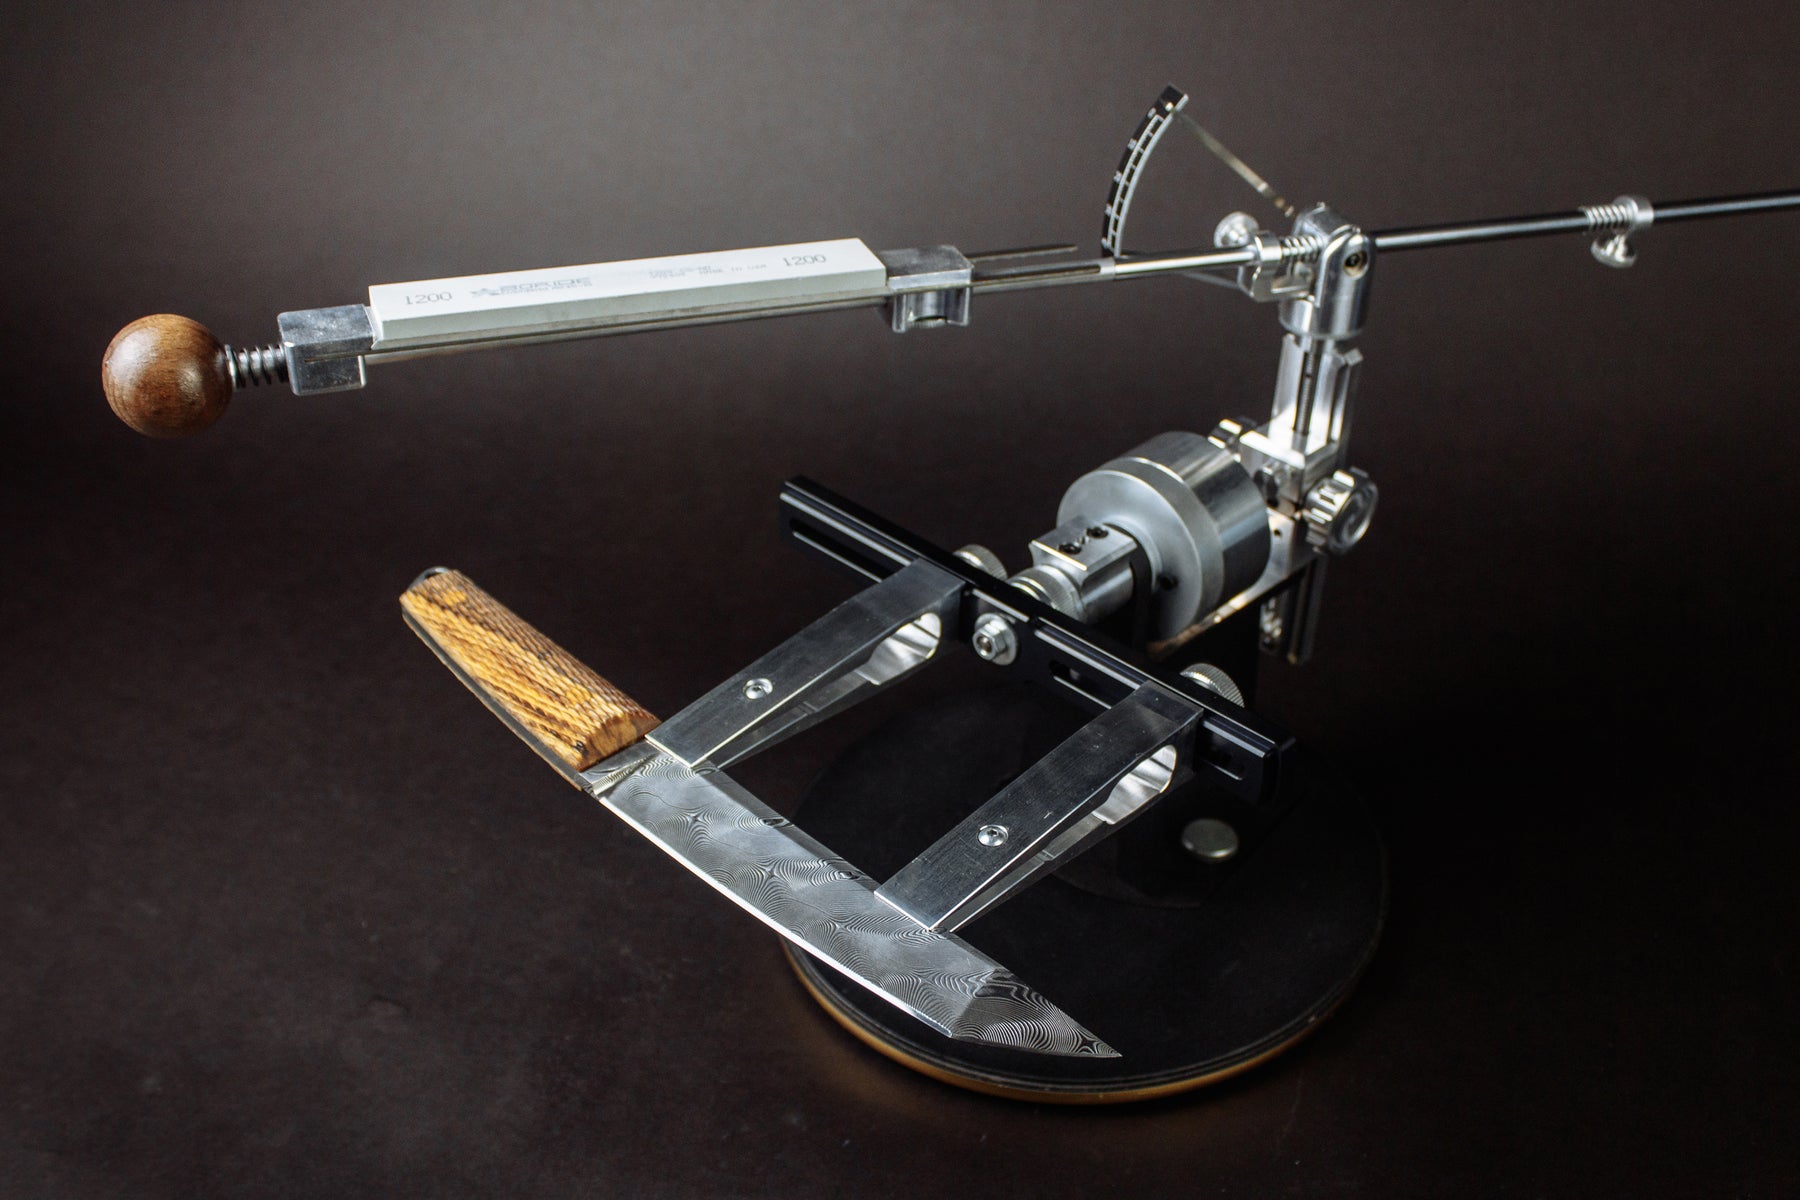 History of the development of sharpening devices